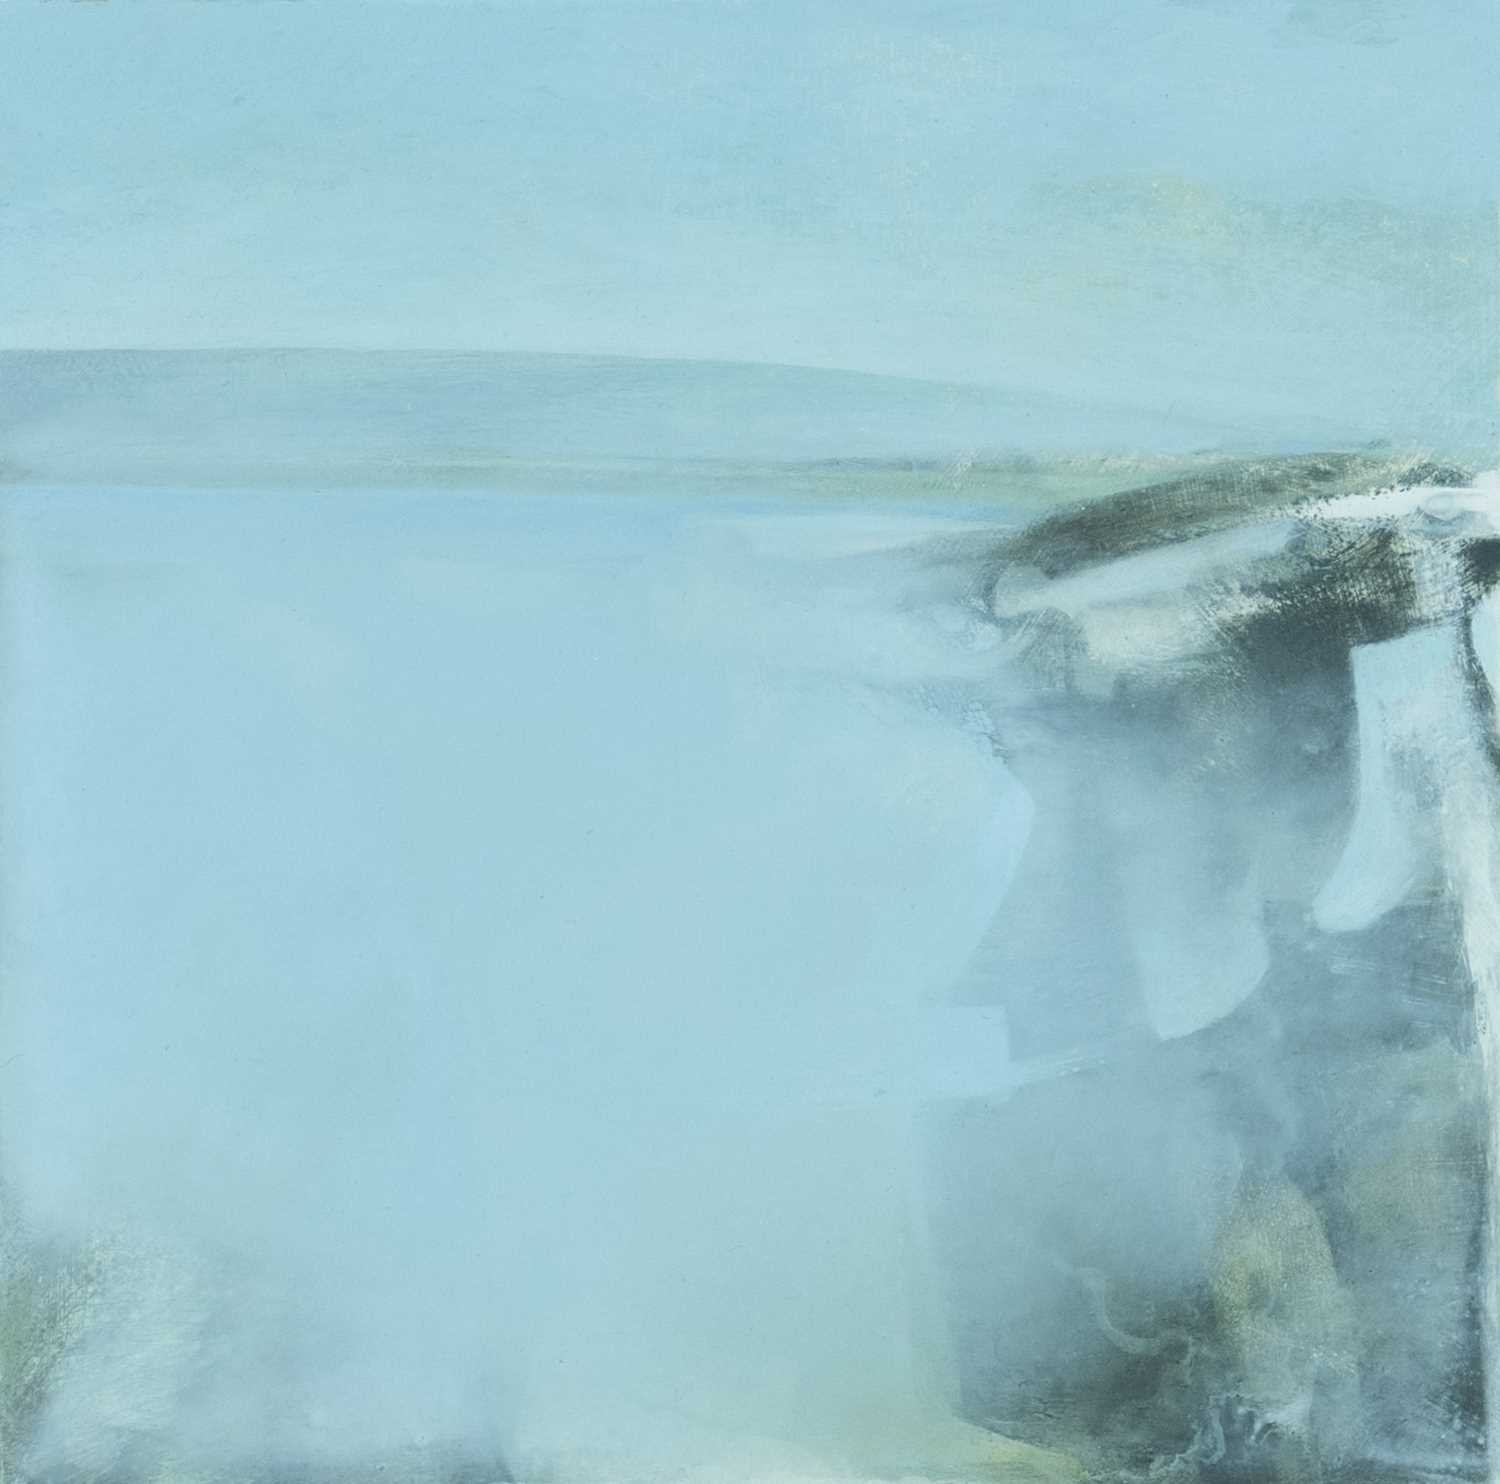 ‡ DICK CHAPPELL (b.1954) oil on panel - entitled verso, 'Sound Dampened by Mist', on Martin Tinney